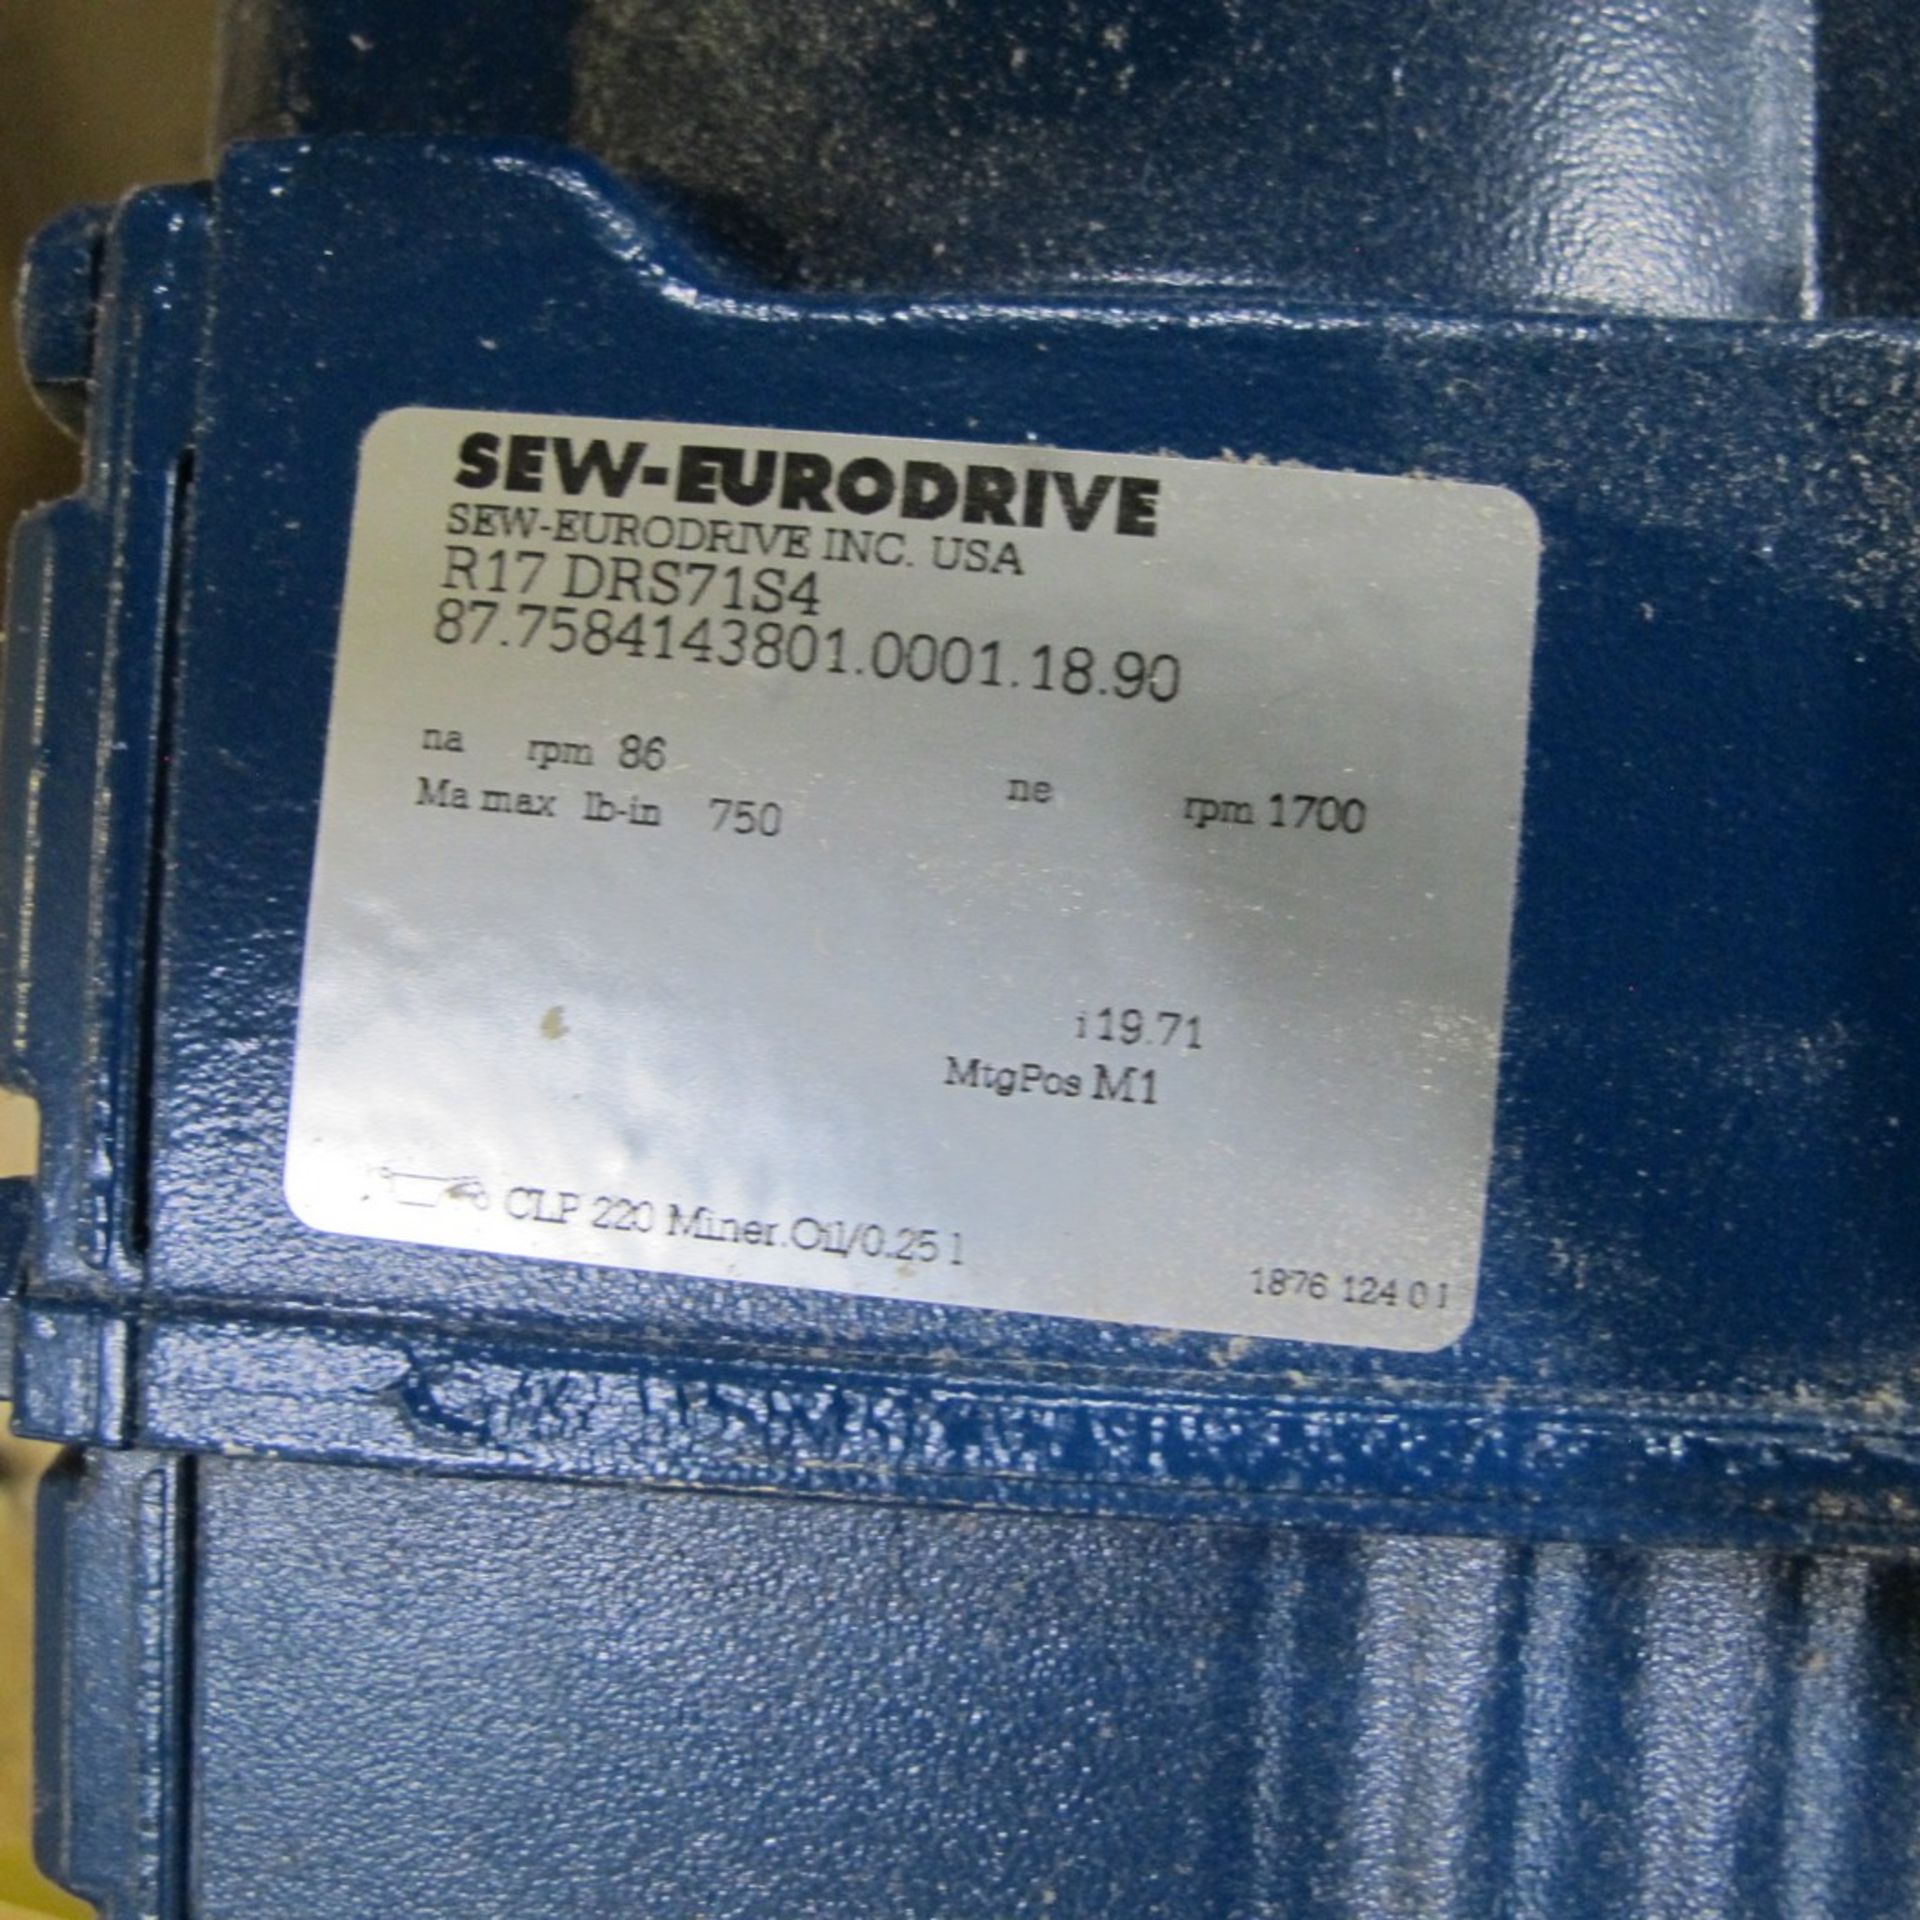 SEW EURODRIVE R17DRS71S4 SERVO DRIVE, 0.50 S1 HP, 230/460V, 1,700/86 RPM W/ GEARBOX/REDUCER 19.71 - Image 3 of 3